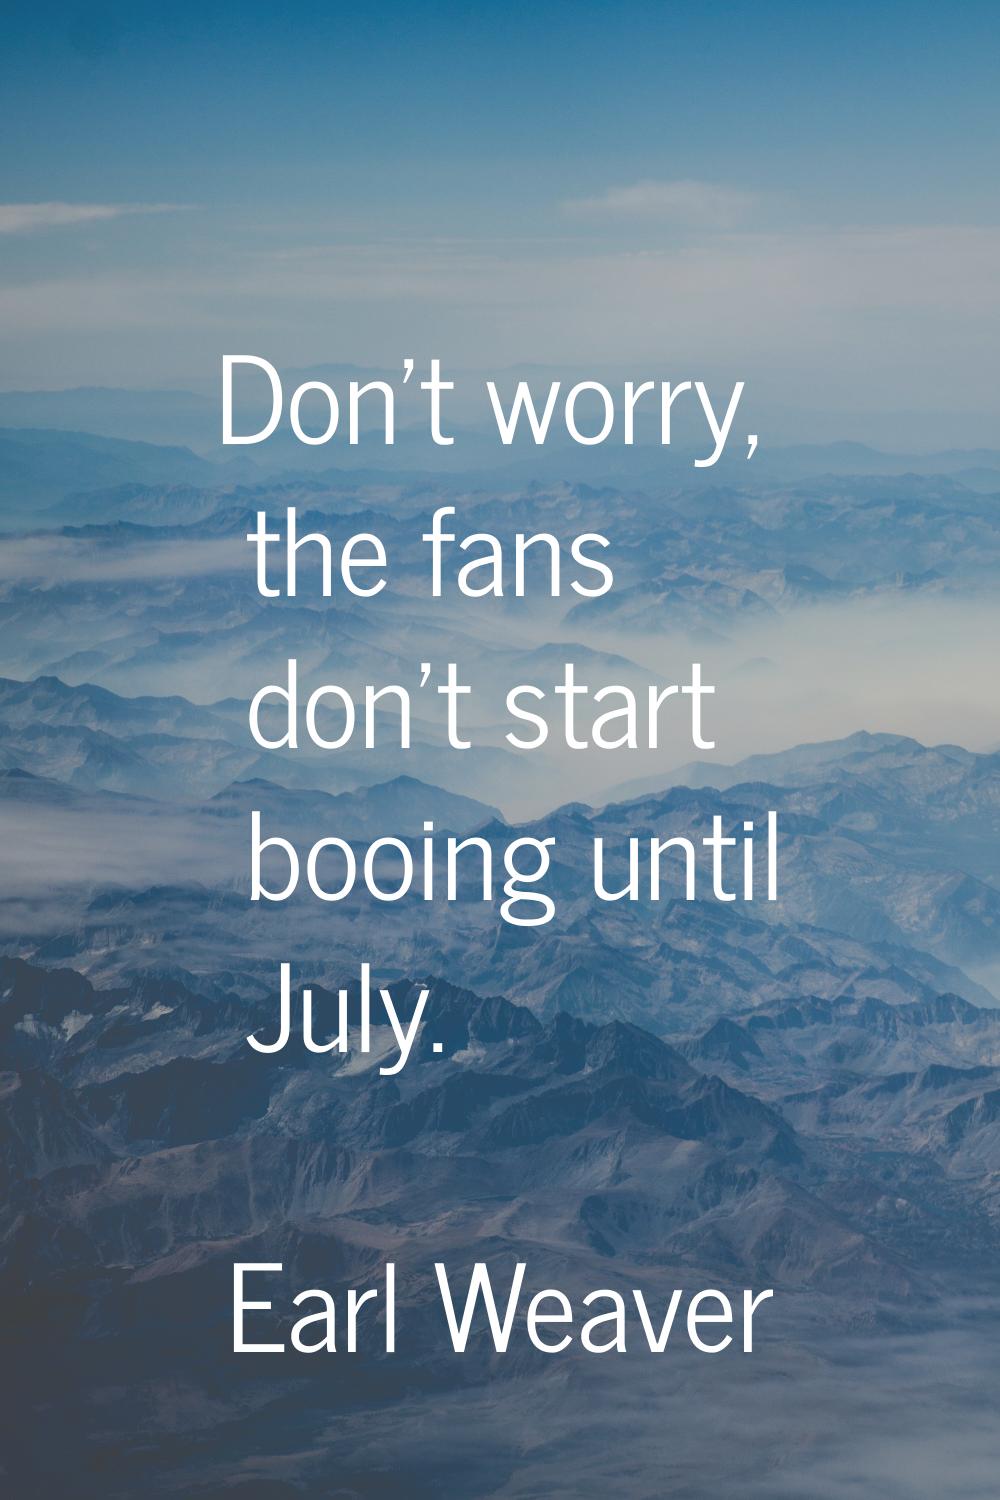 Don't worry, the fans don't start booing until July.